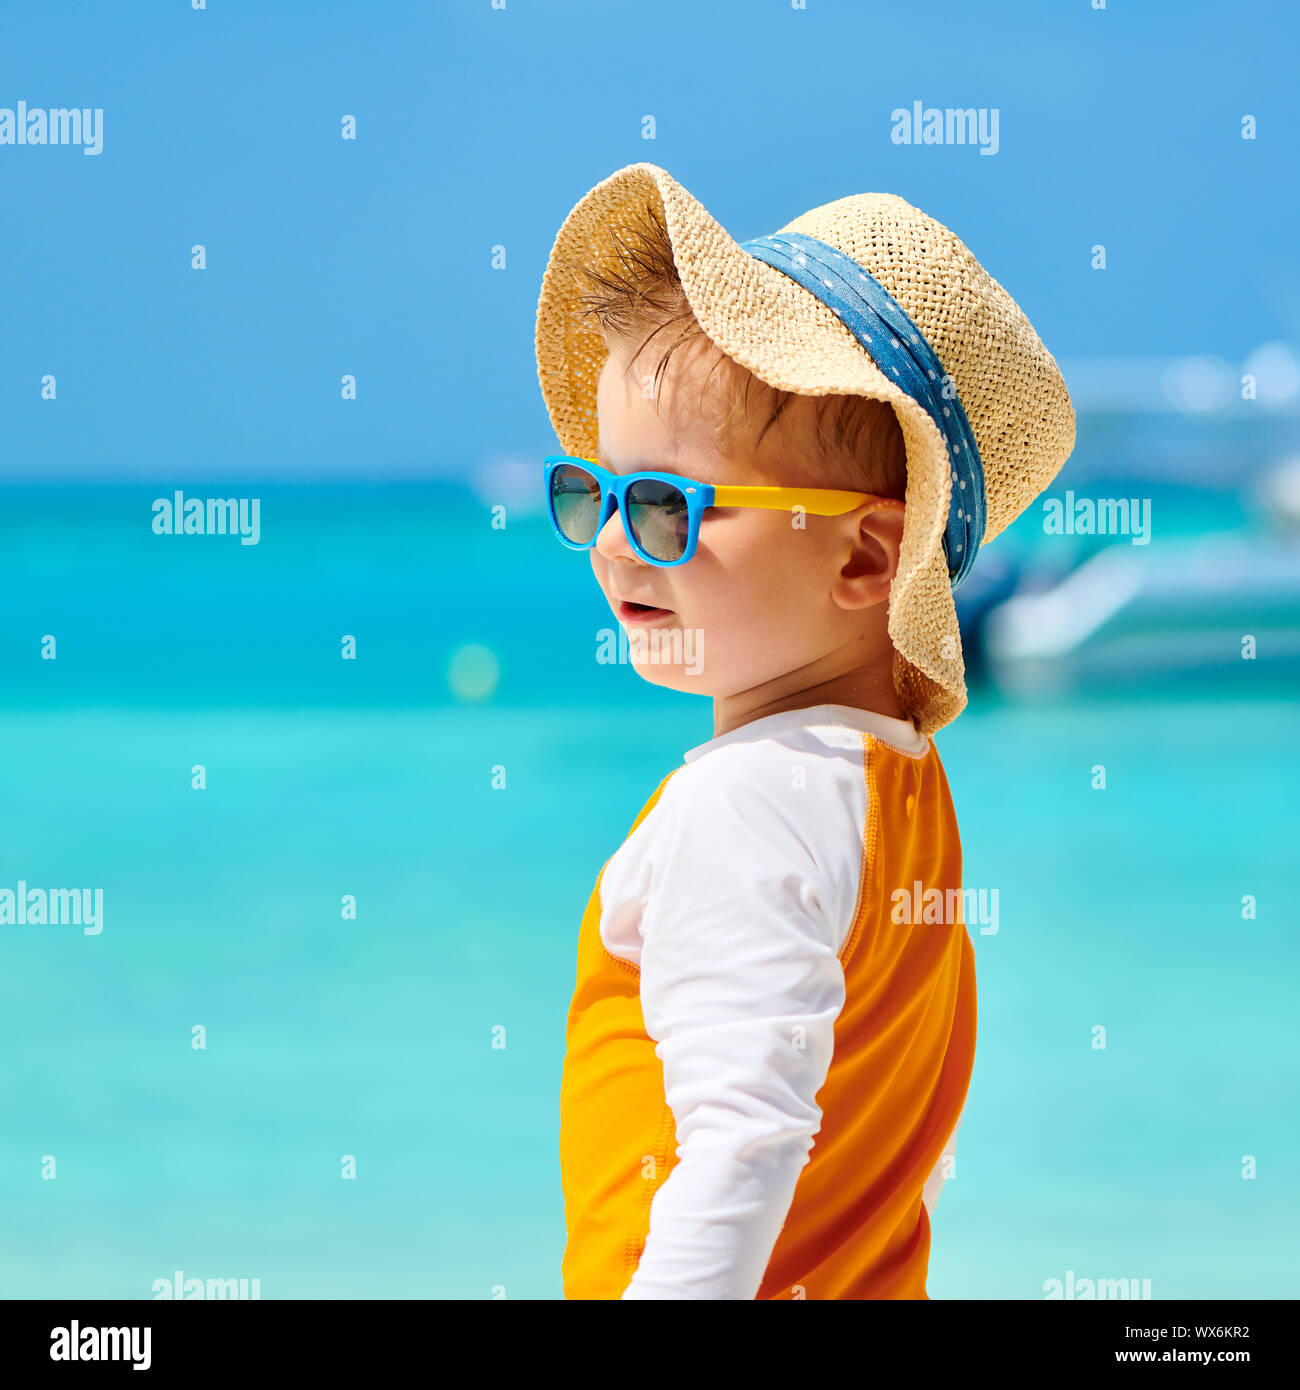 Toddler boy with sunglasses on beach Stock Photo